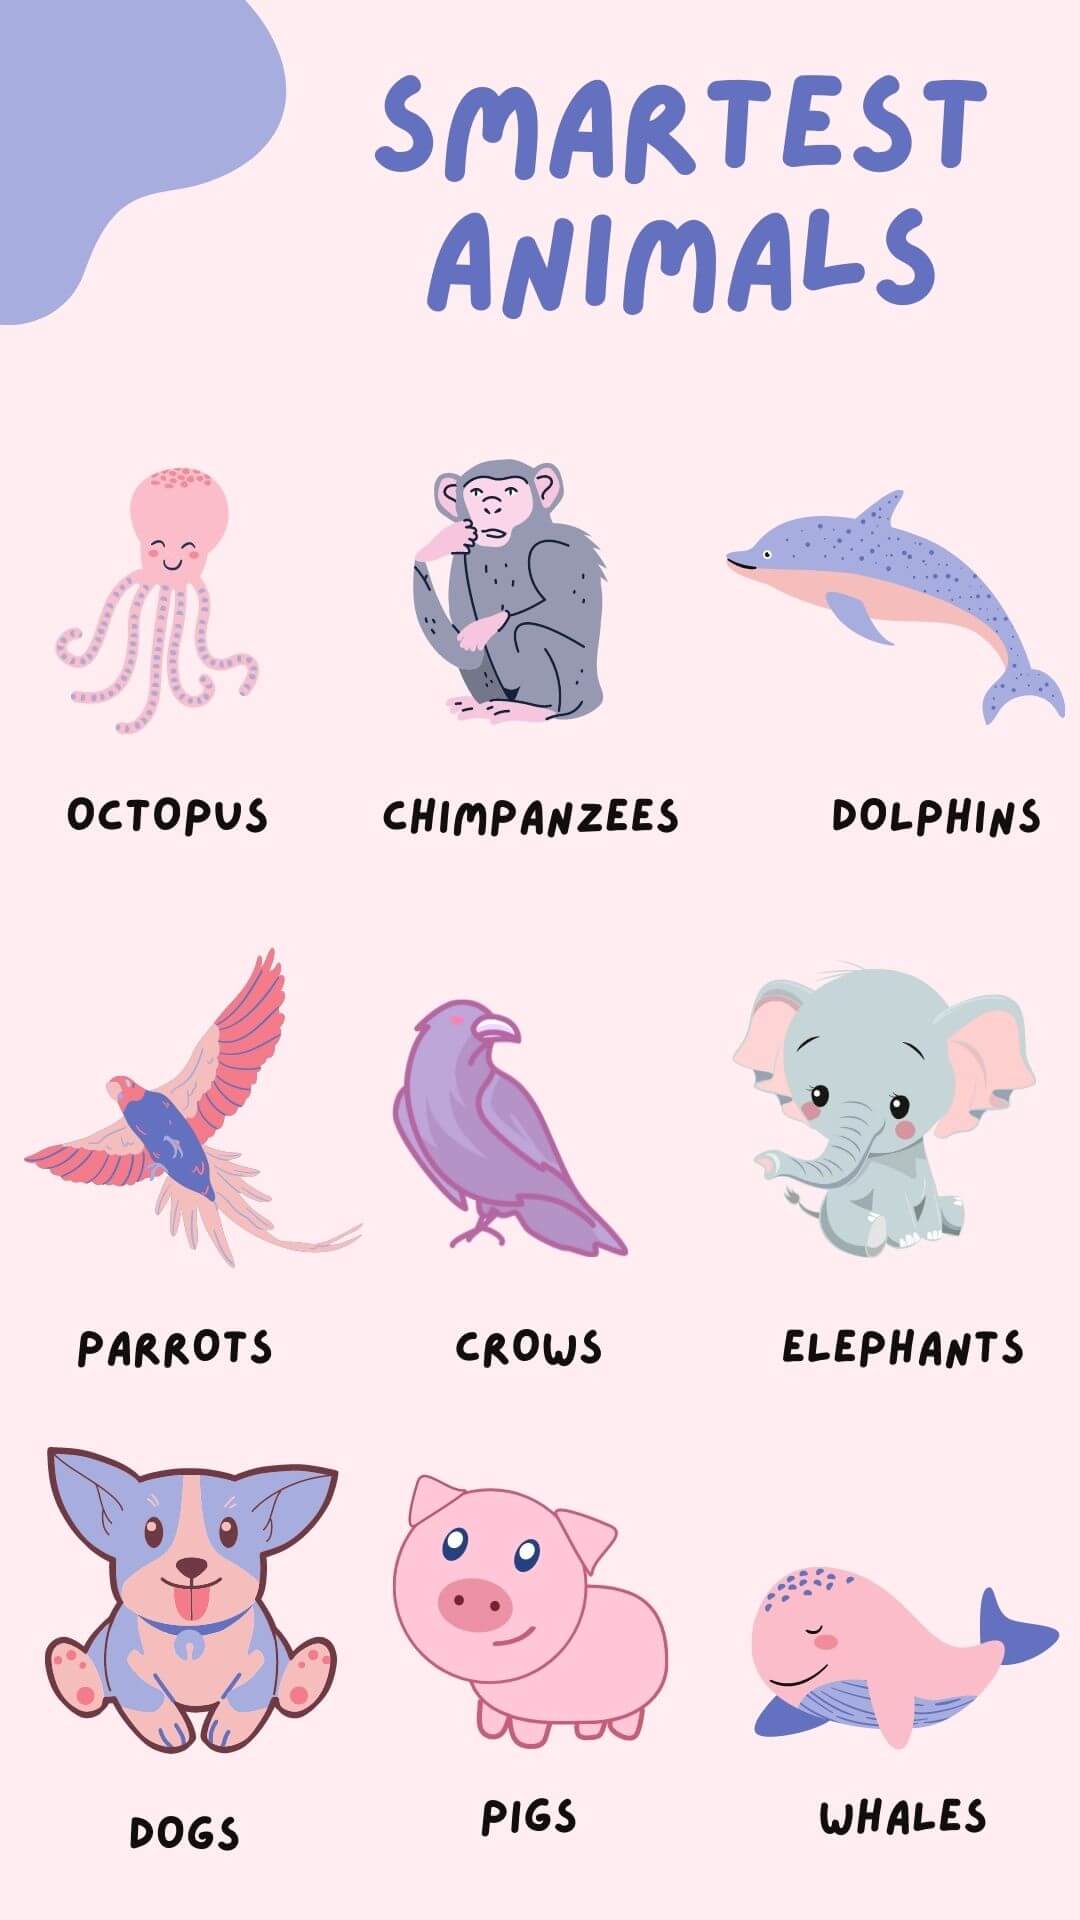 Animals with low intelligence.